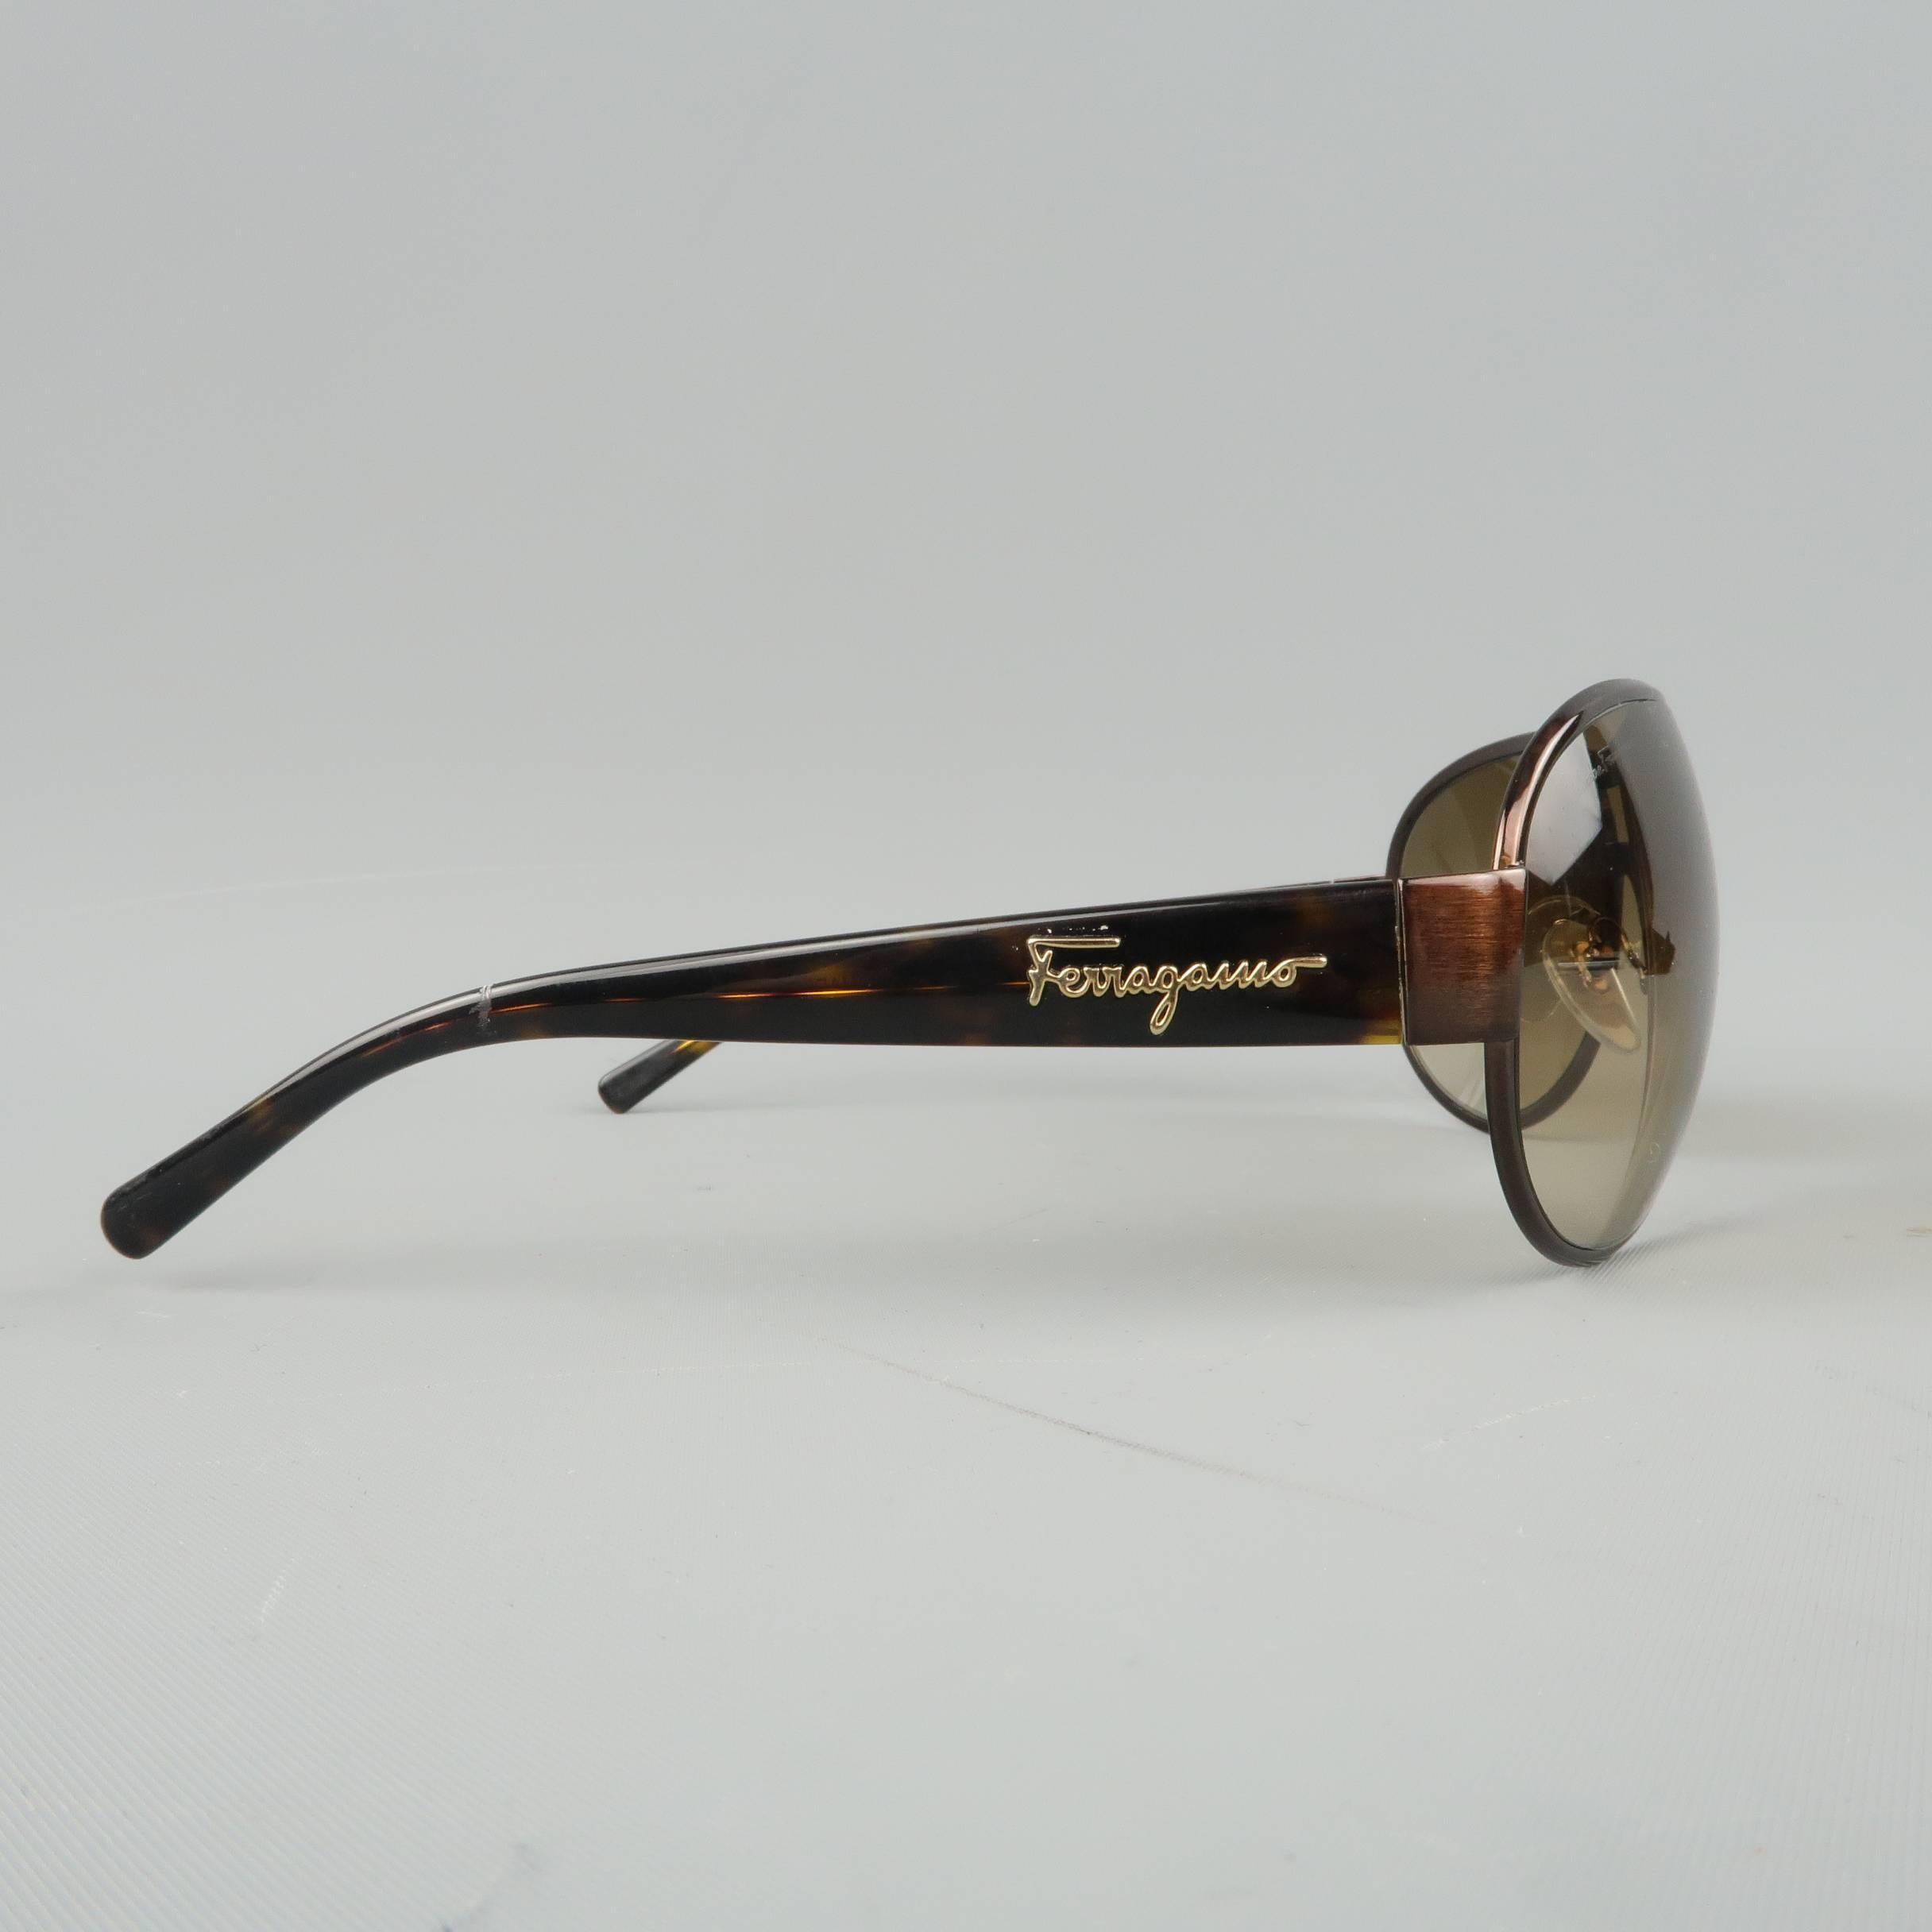 SALVATORE FERRAGAMO aviator sunglasses come in copper tone metal with tan lenses and tortoise pattern acetate arms with gold tone logo. With case. Made in Italy.
 
Excellent Pre-Owned Condition.
Marked: 1132 578/13 67-13 120
 
Measurements:
